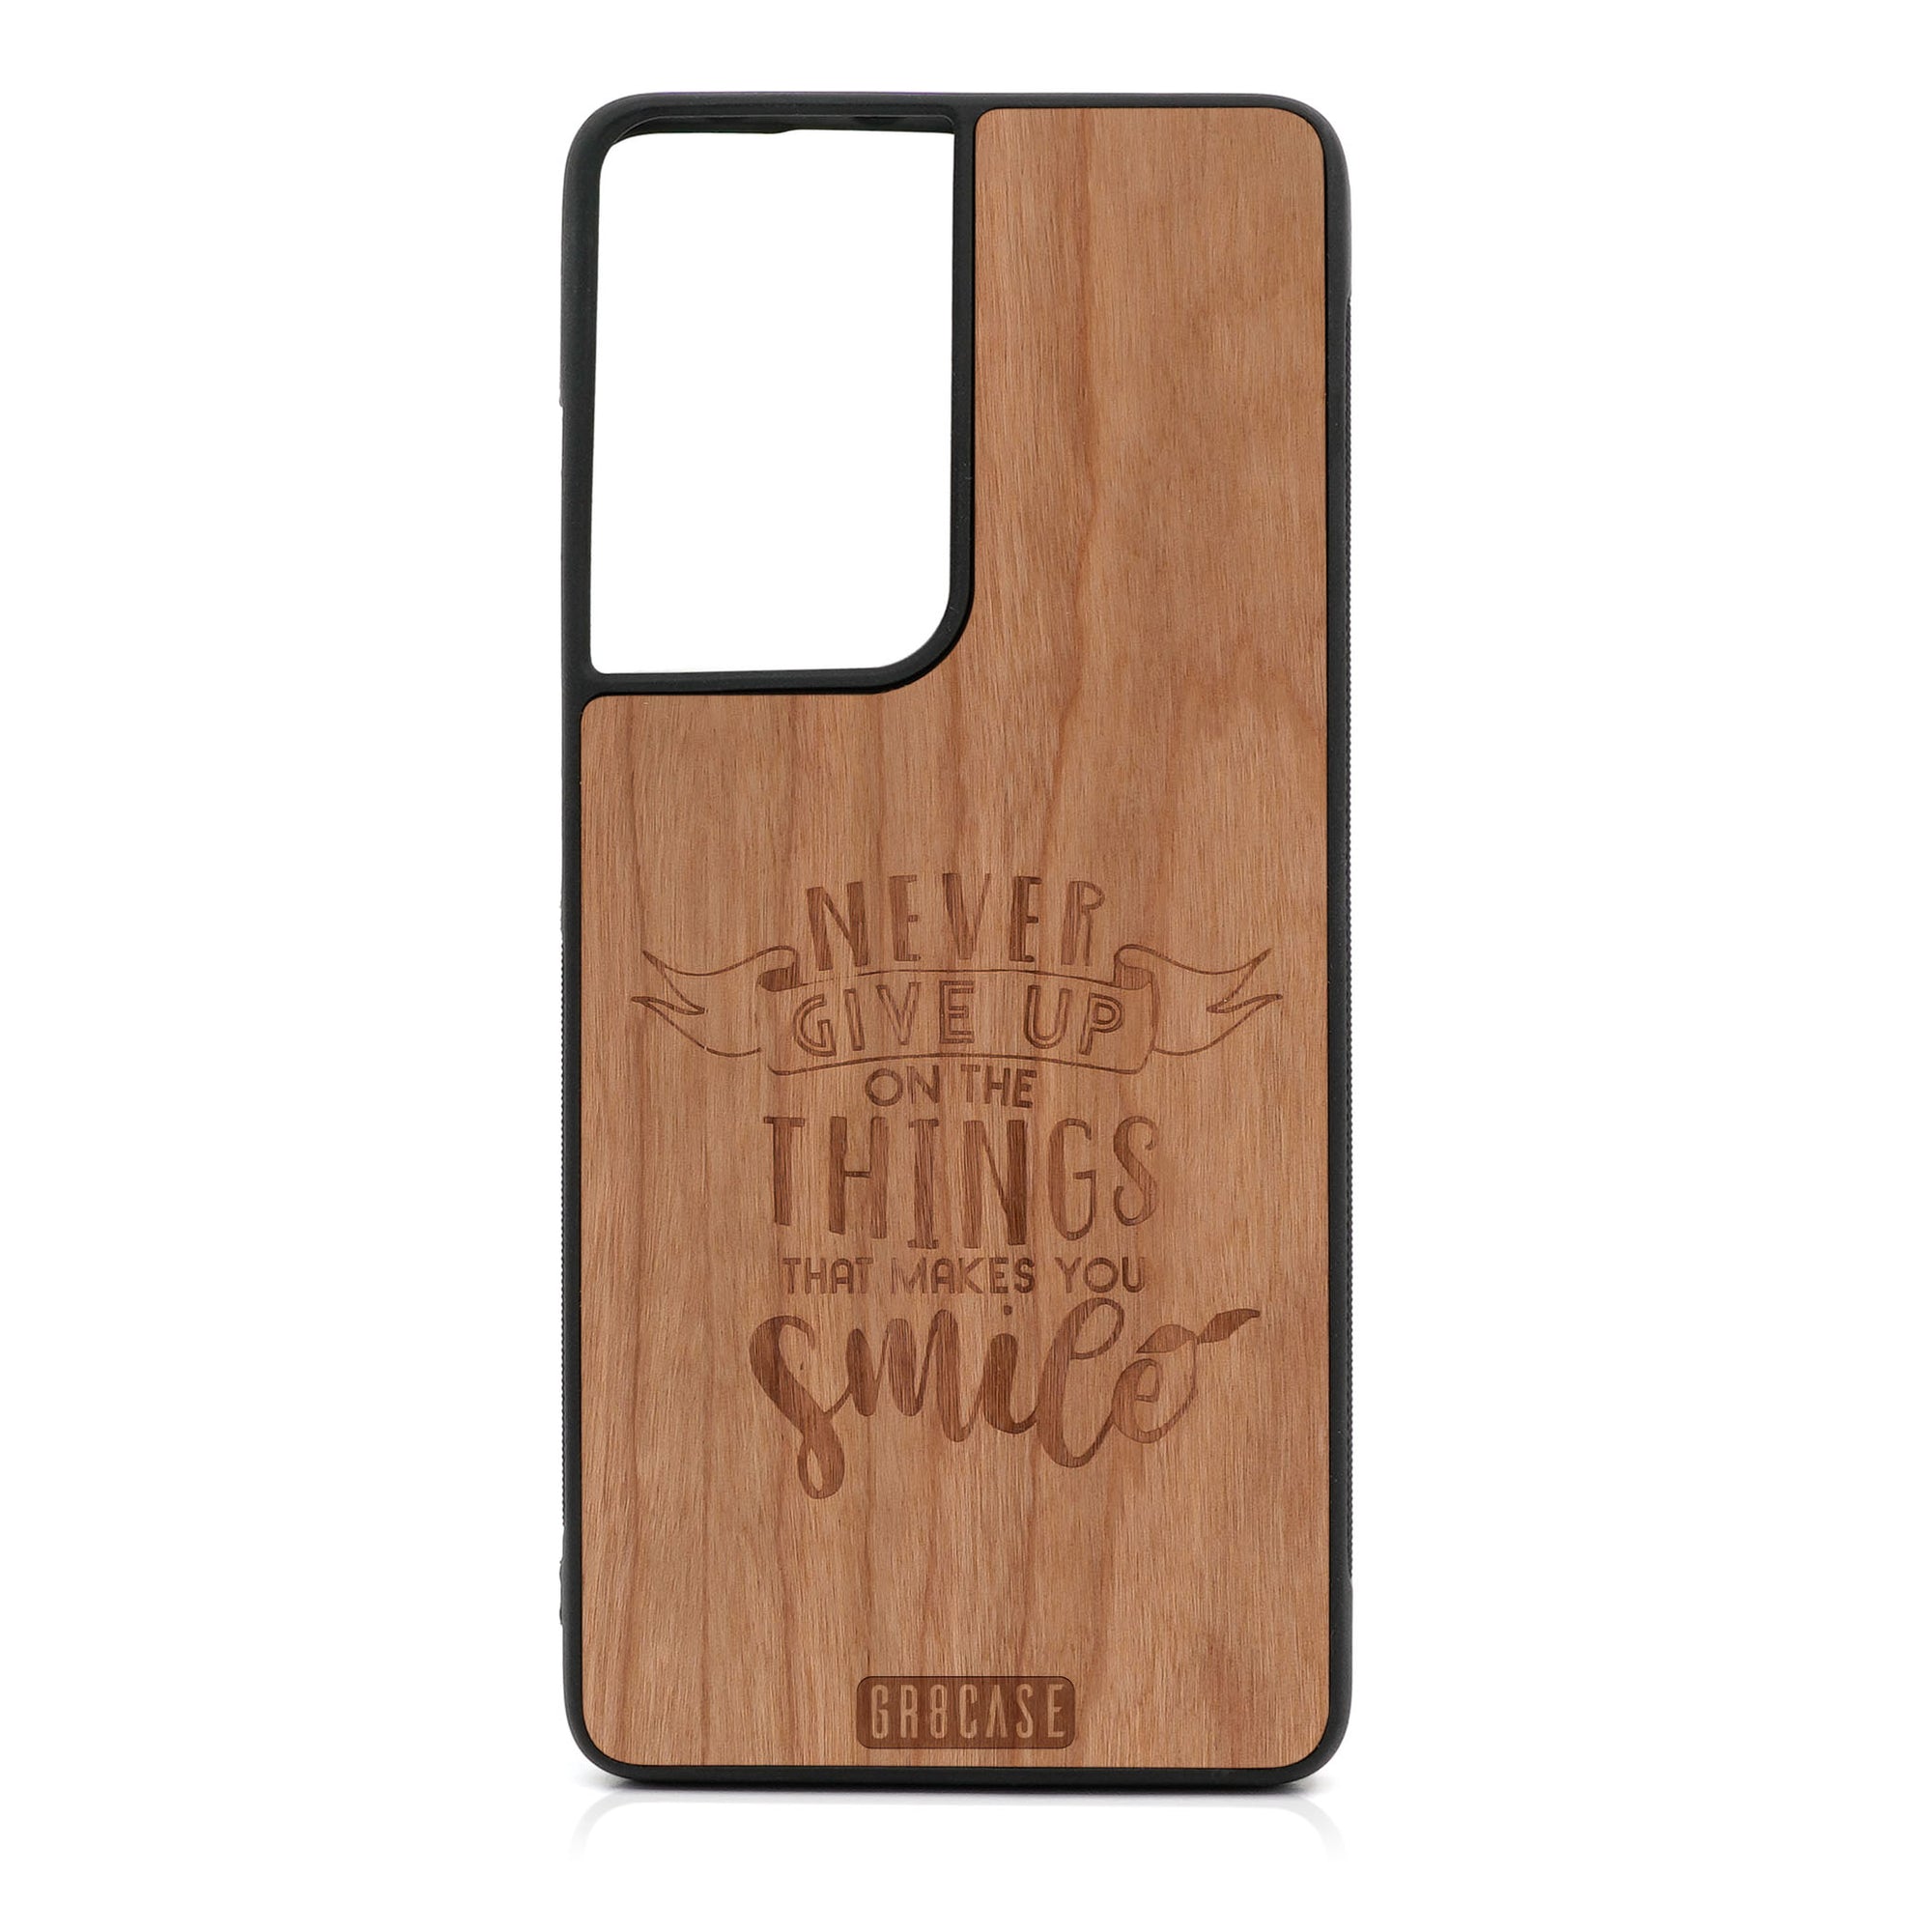 Never Give Up On The Things That Make You Smile Design Wood Case For Samsung Galaxy S21 Ultra 5G